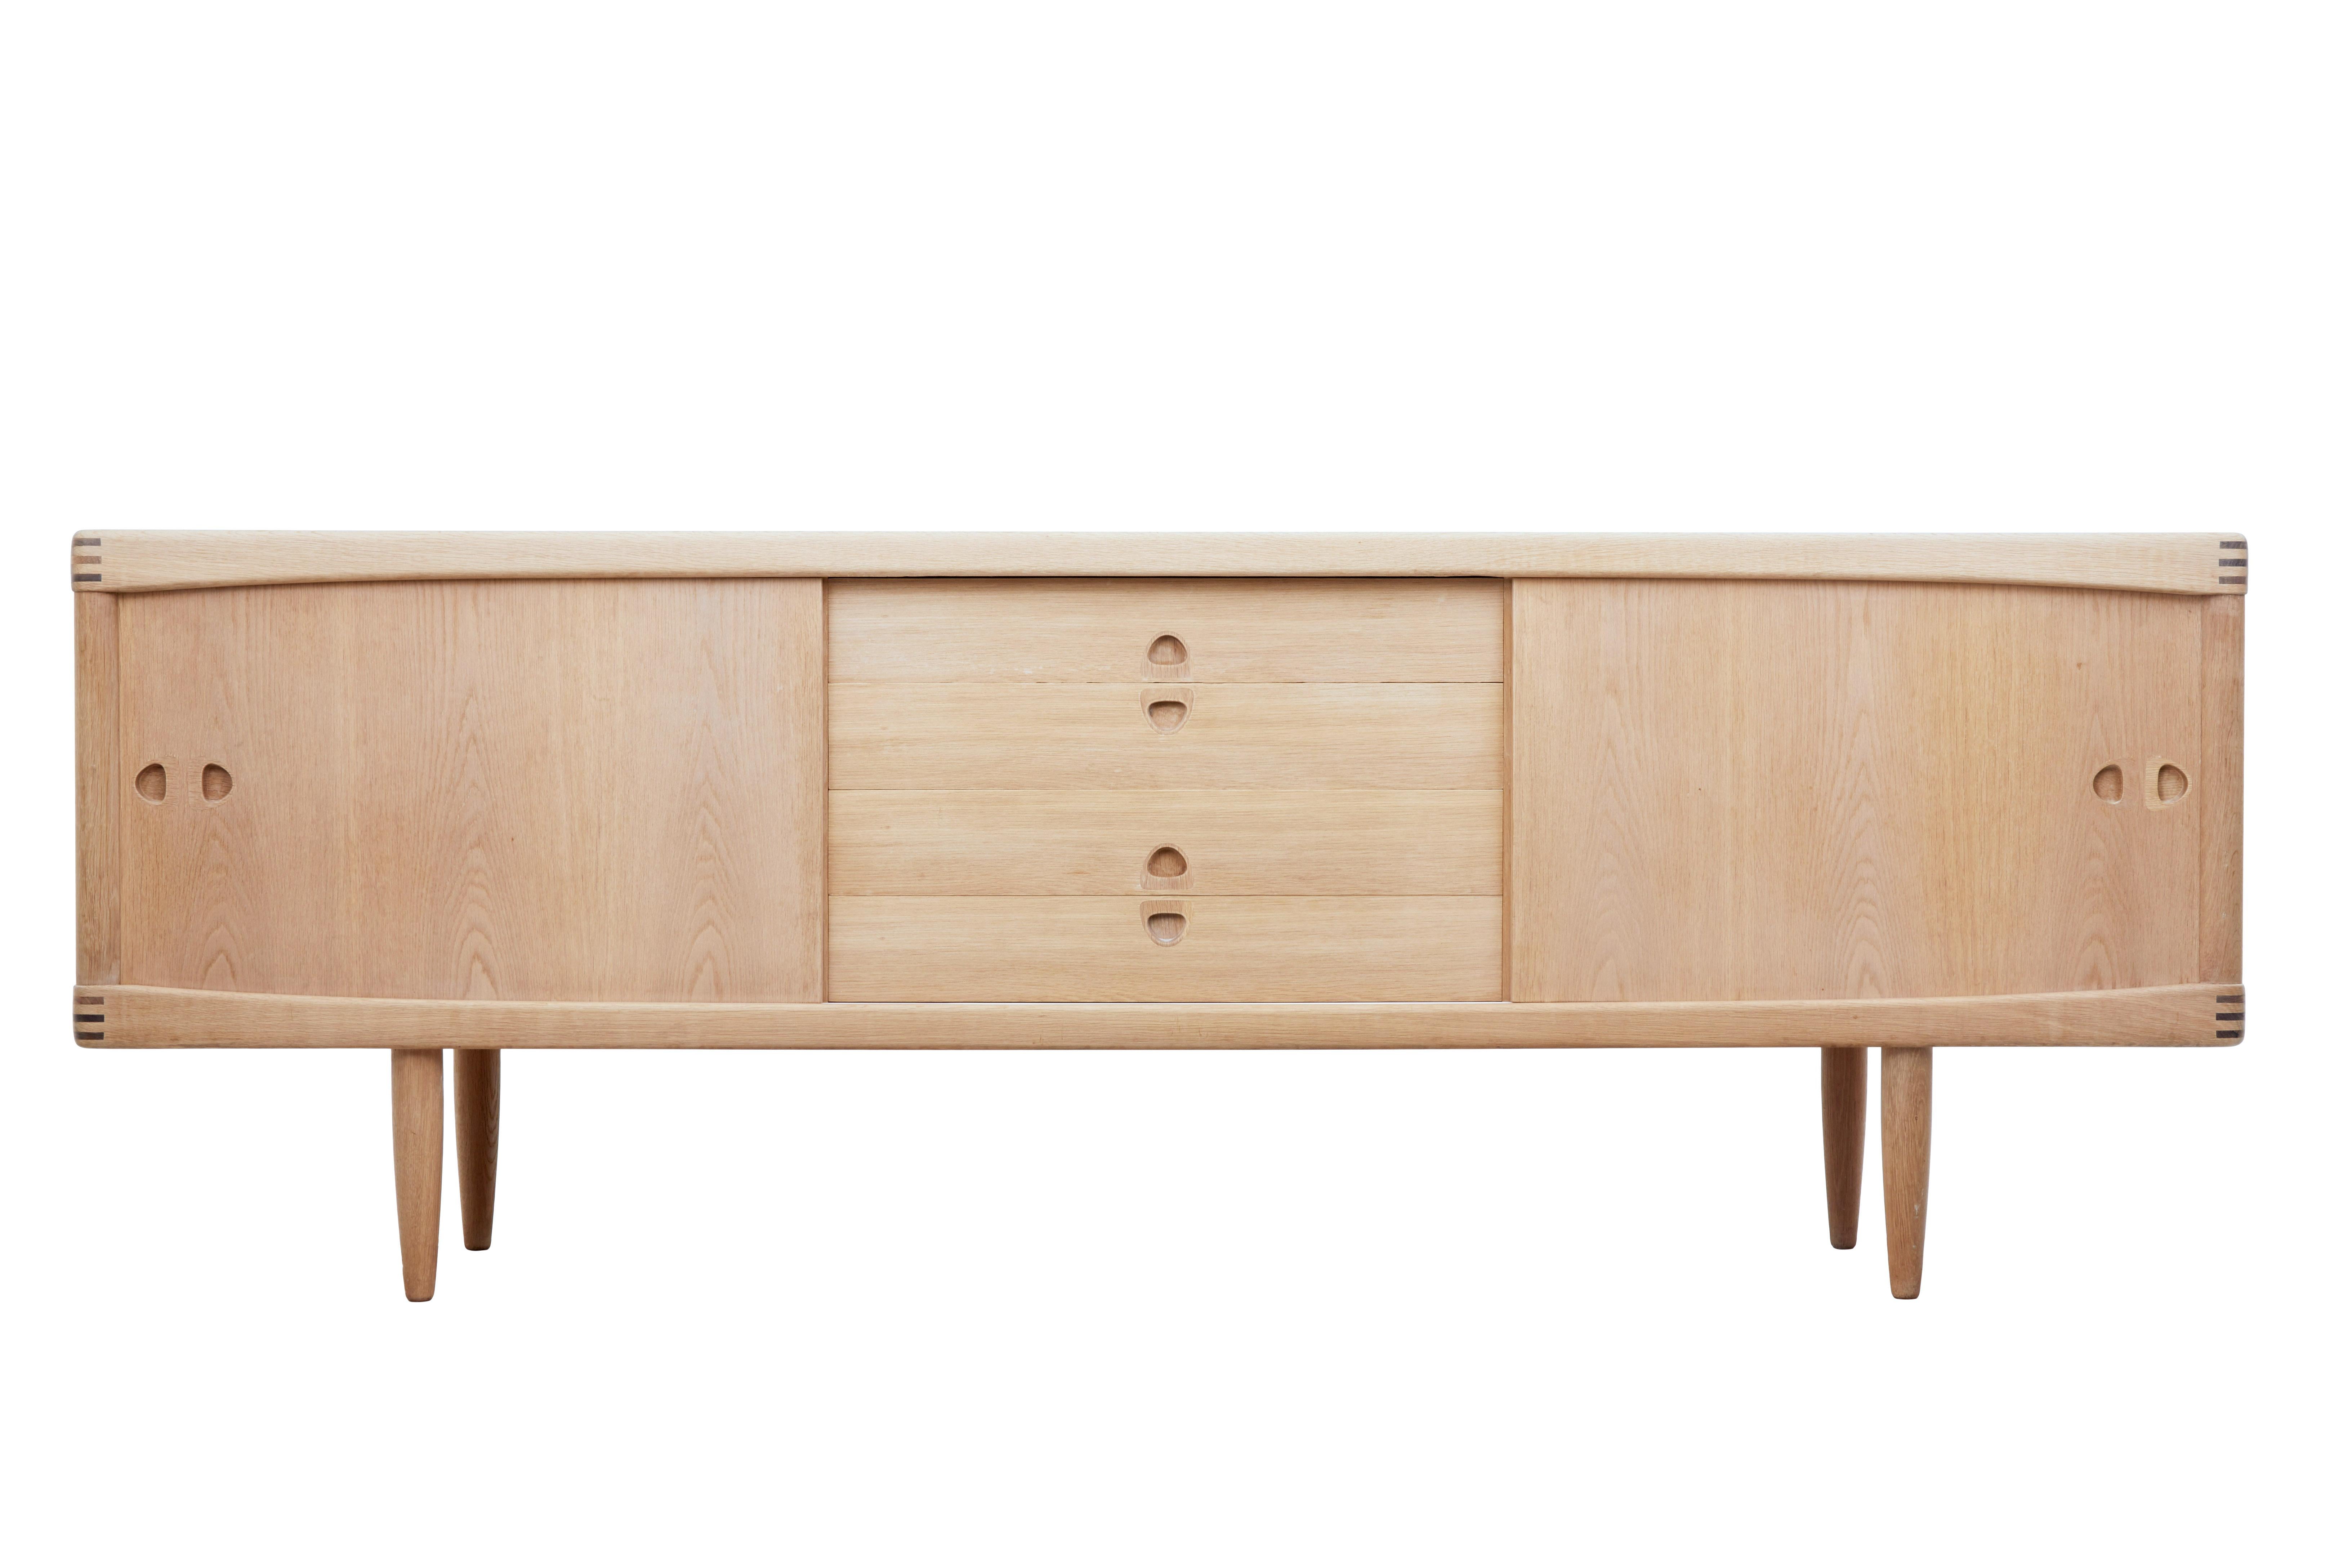 Fine quality sideboard danish sideboard, circa 1960.

Henry Walter Klein was a Norwegian born designer who moved to Denmark in 1960 and became one of Bramin's most celebrated designers. He moved to America later in his career.

Designed by Henry